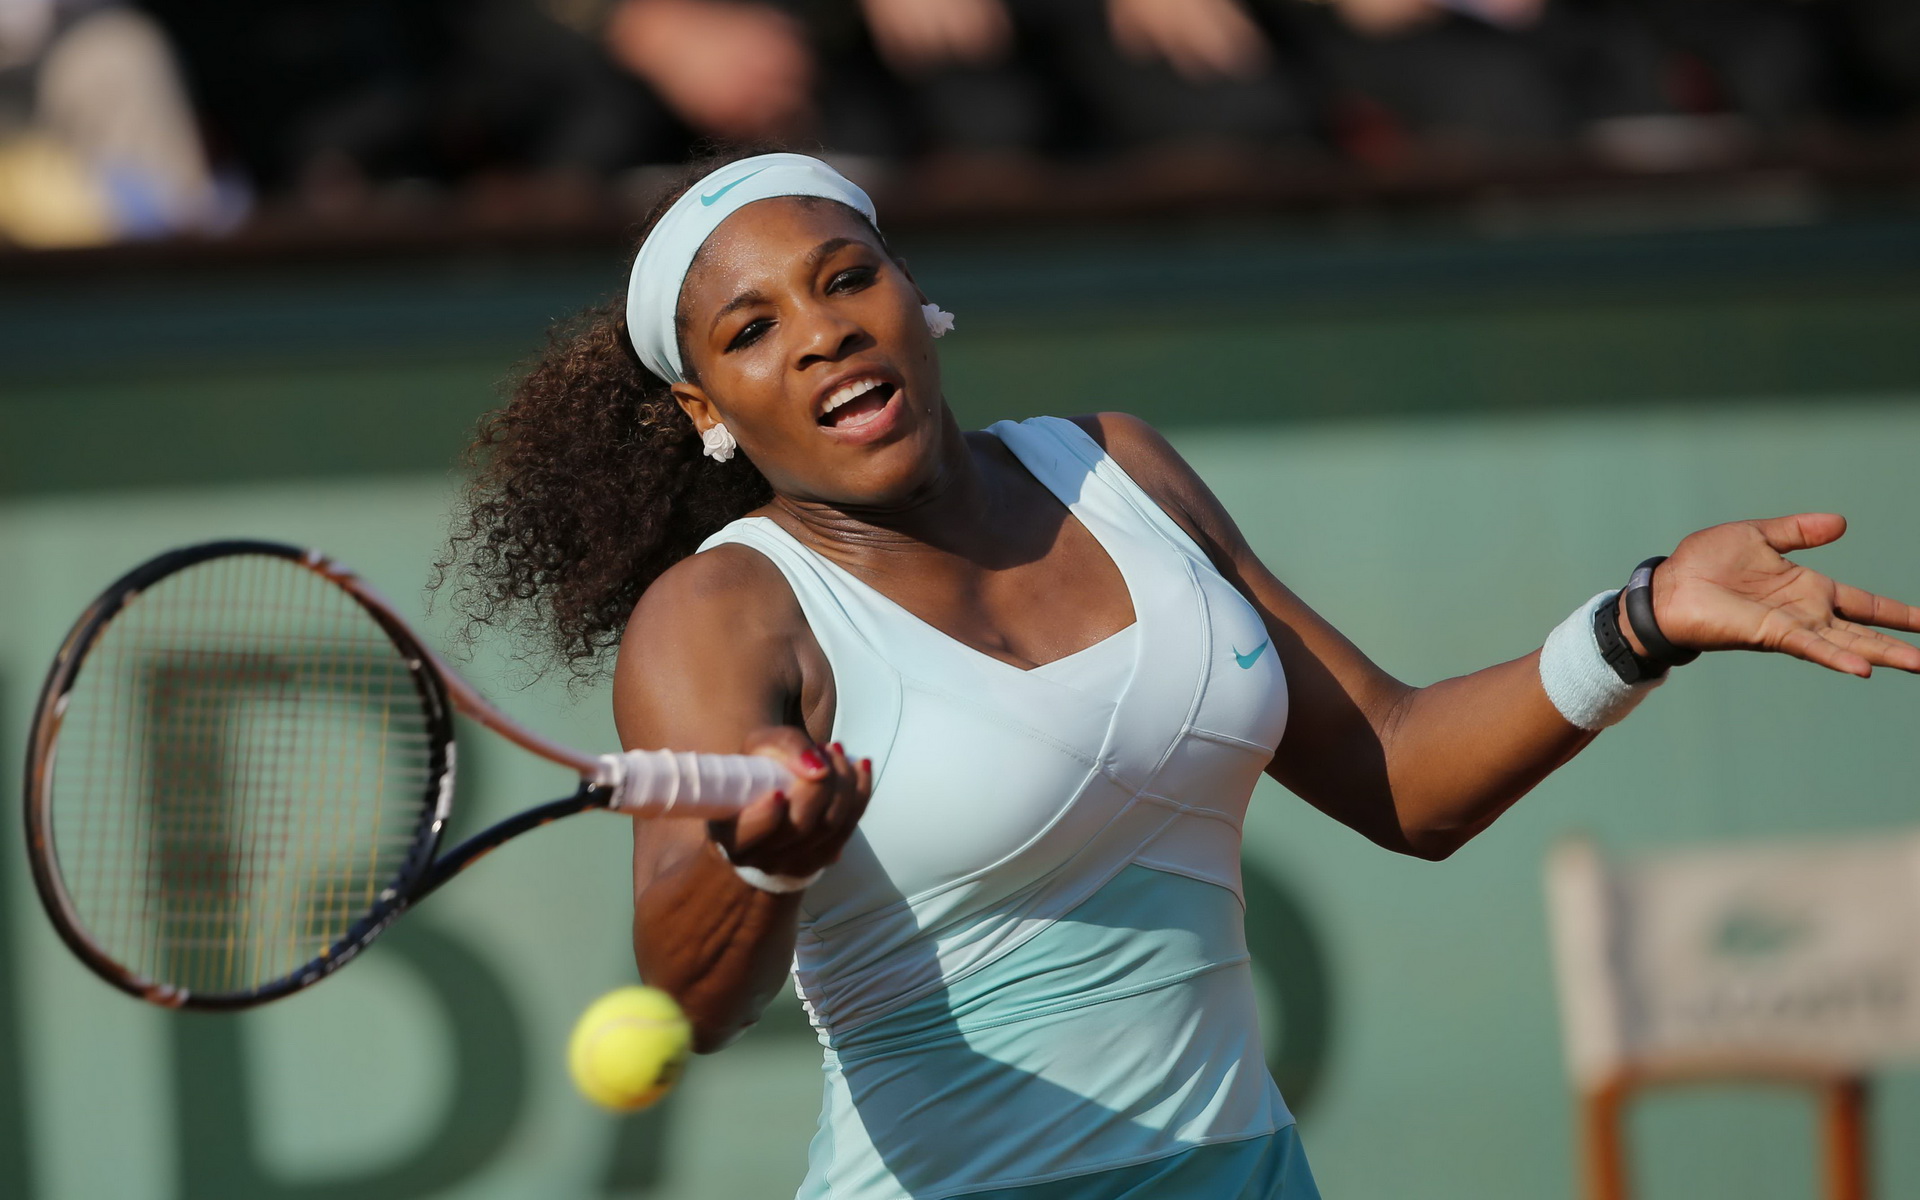 After Long Pursuit Serena Williams Sets Record With 23rd